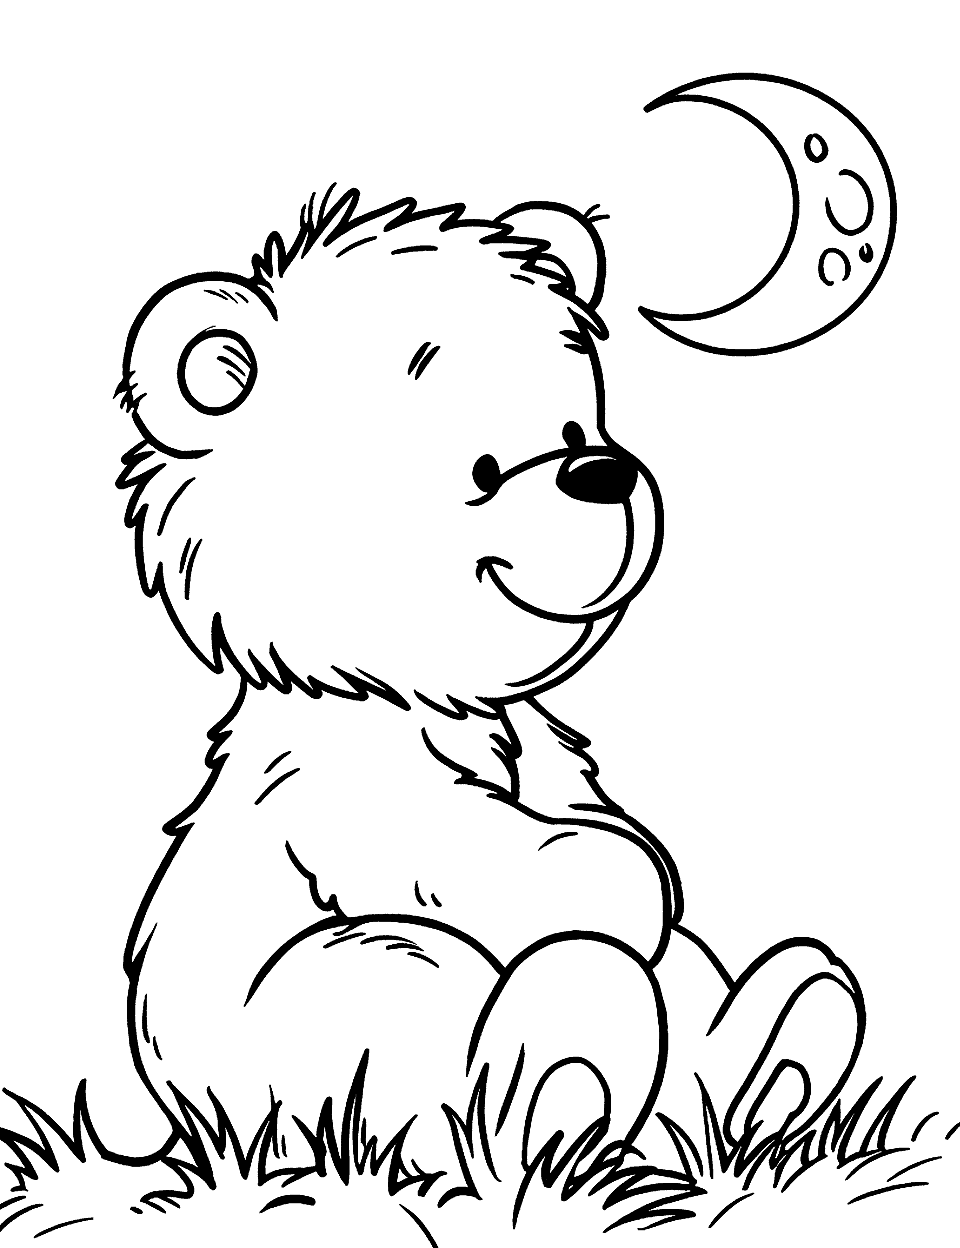 Teddy Bear and the Moon Coloring Page - A teddy bear sitting on the grass, gazing at the moon.